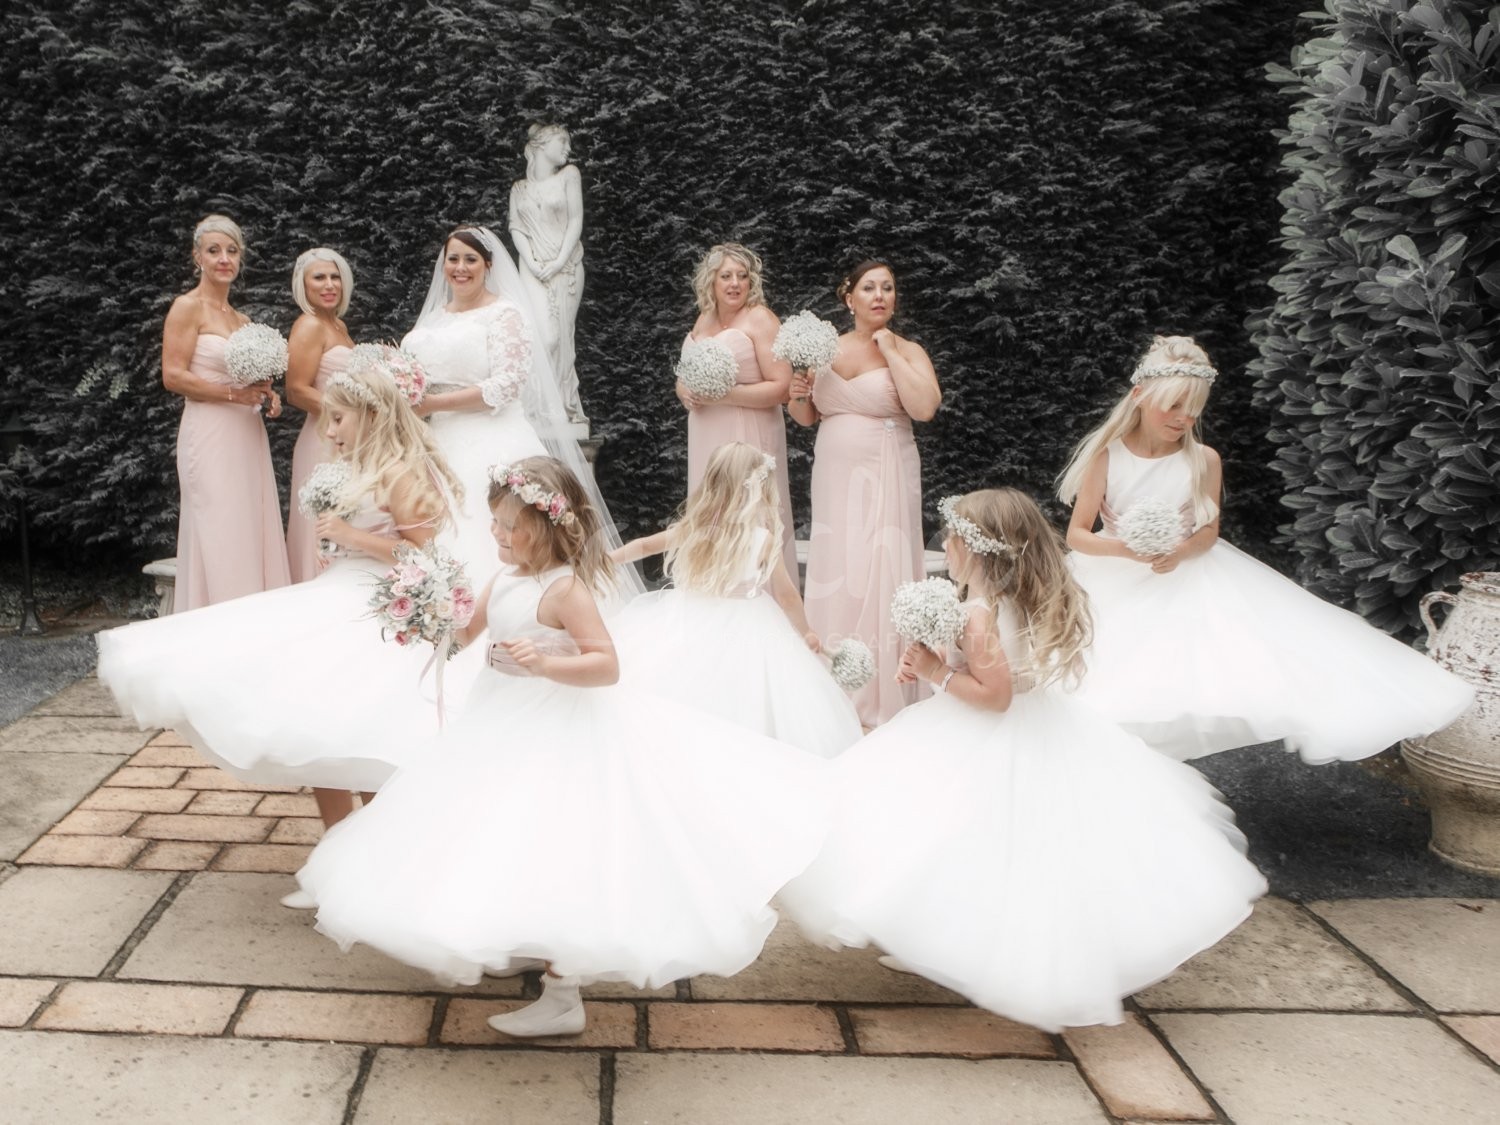 Its just as exciting as Christmas flowergirls, flowers in hair, spinning dresses, reportage, vintage, lace, wedding photography, Yew Lodge Hotel, Captcha Photography